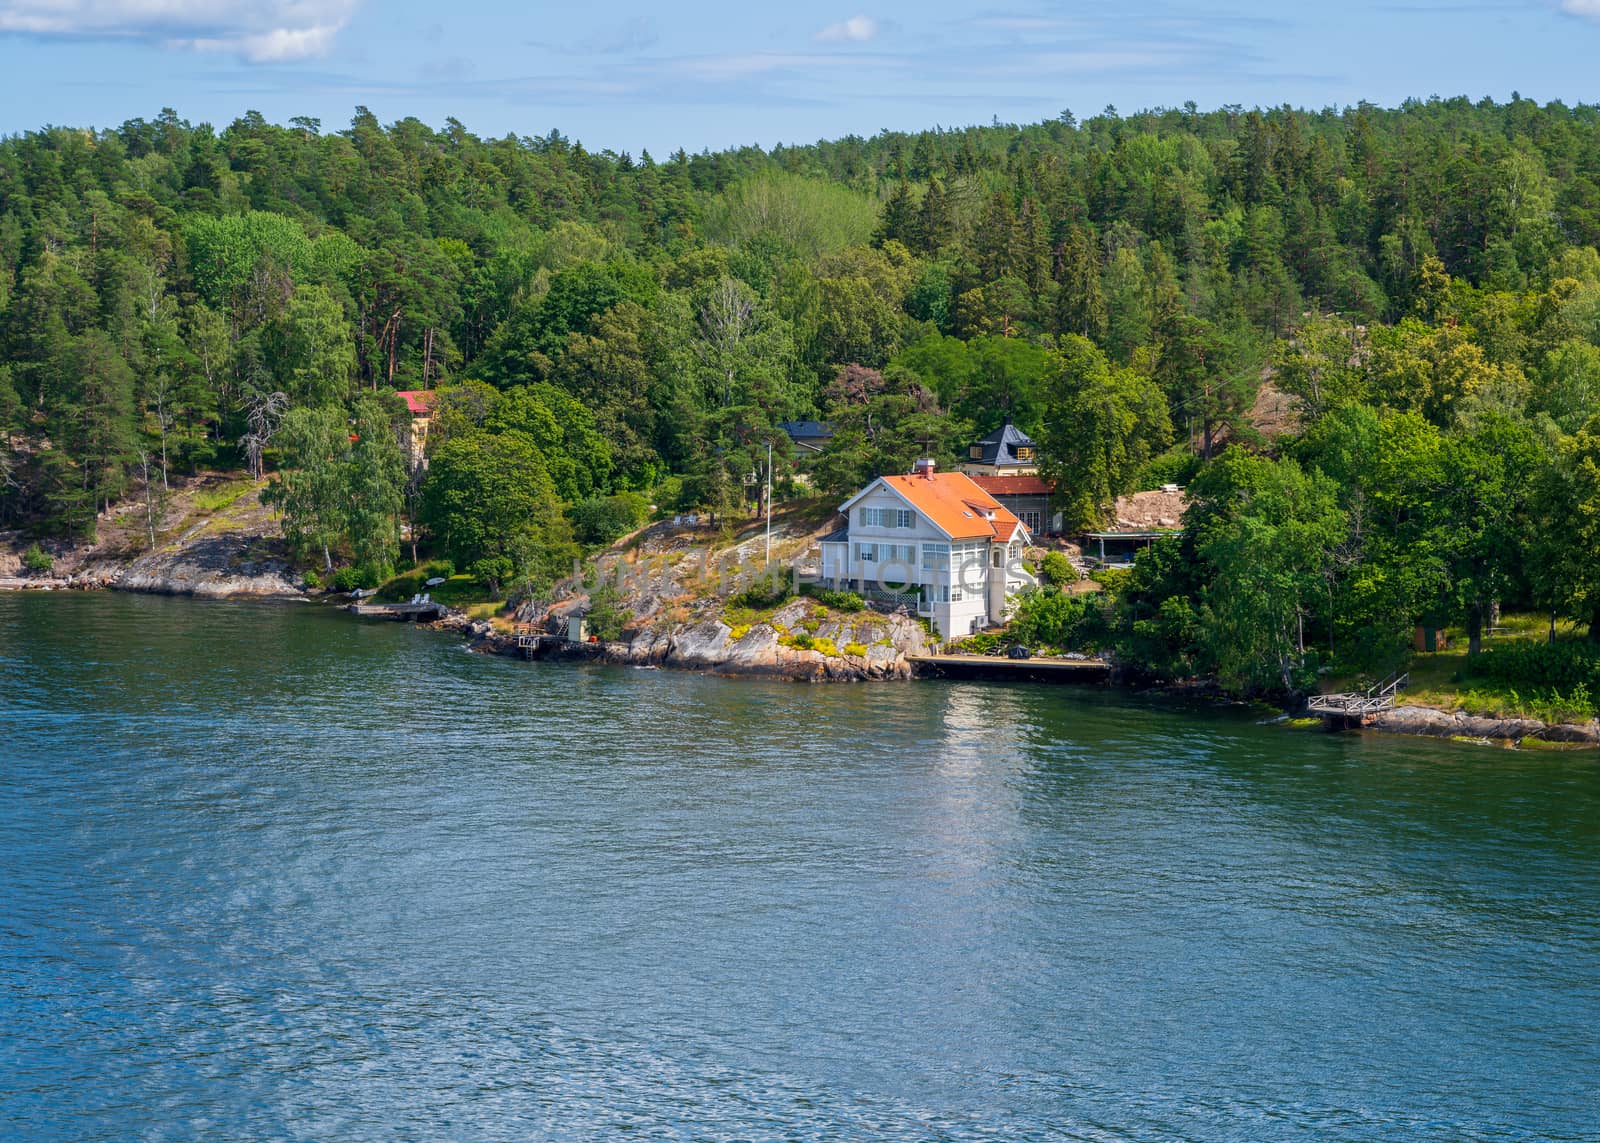 Photo of a white house with a red roof surrounded by green trees on an island in the Swedish archipelago.